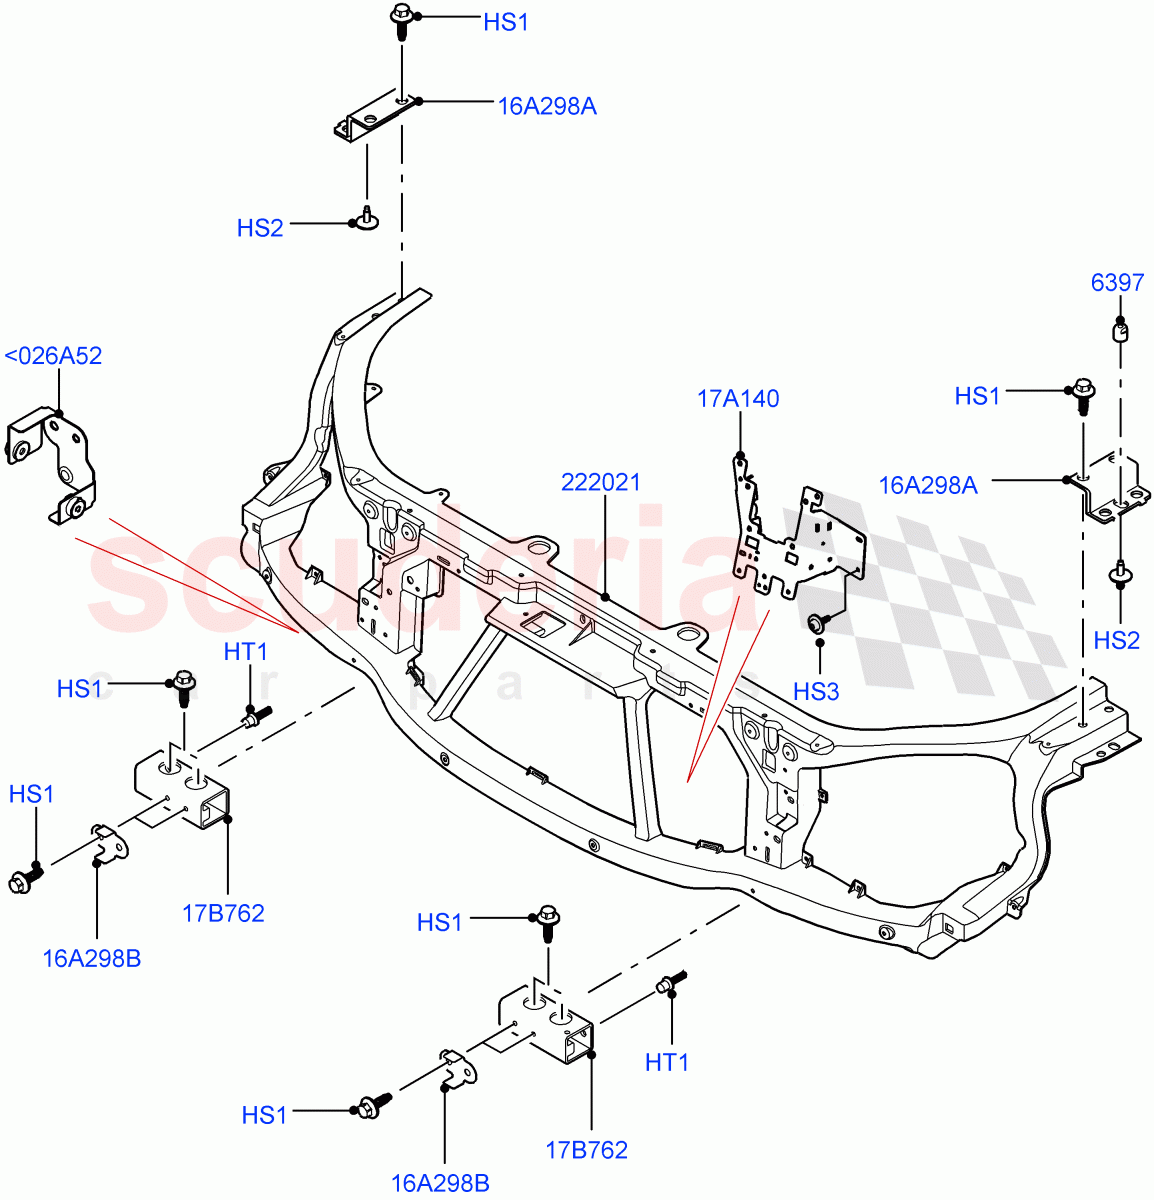 Front Panels, Aprons & Side Members(Front Panel) of Land Rover Land Rover Range Rover (2012-2021) [4.4 DOHC Diesel V8 DITC]